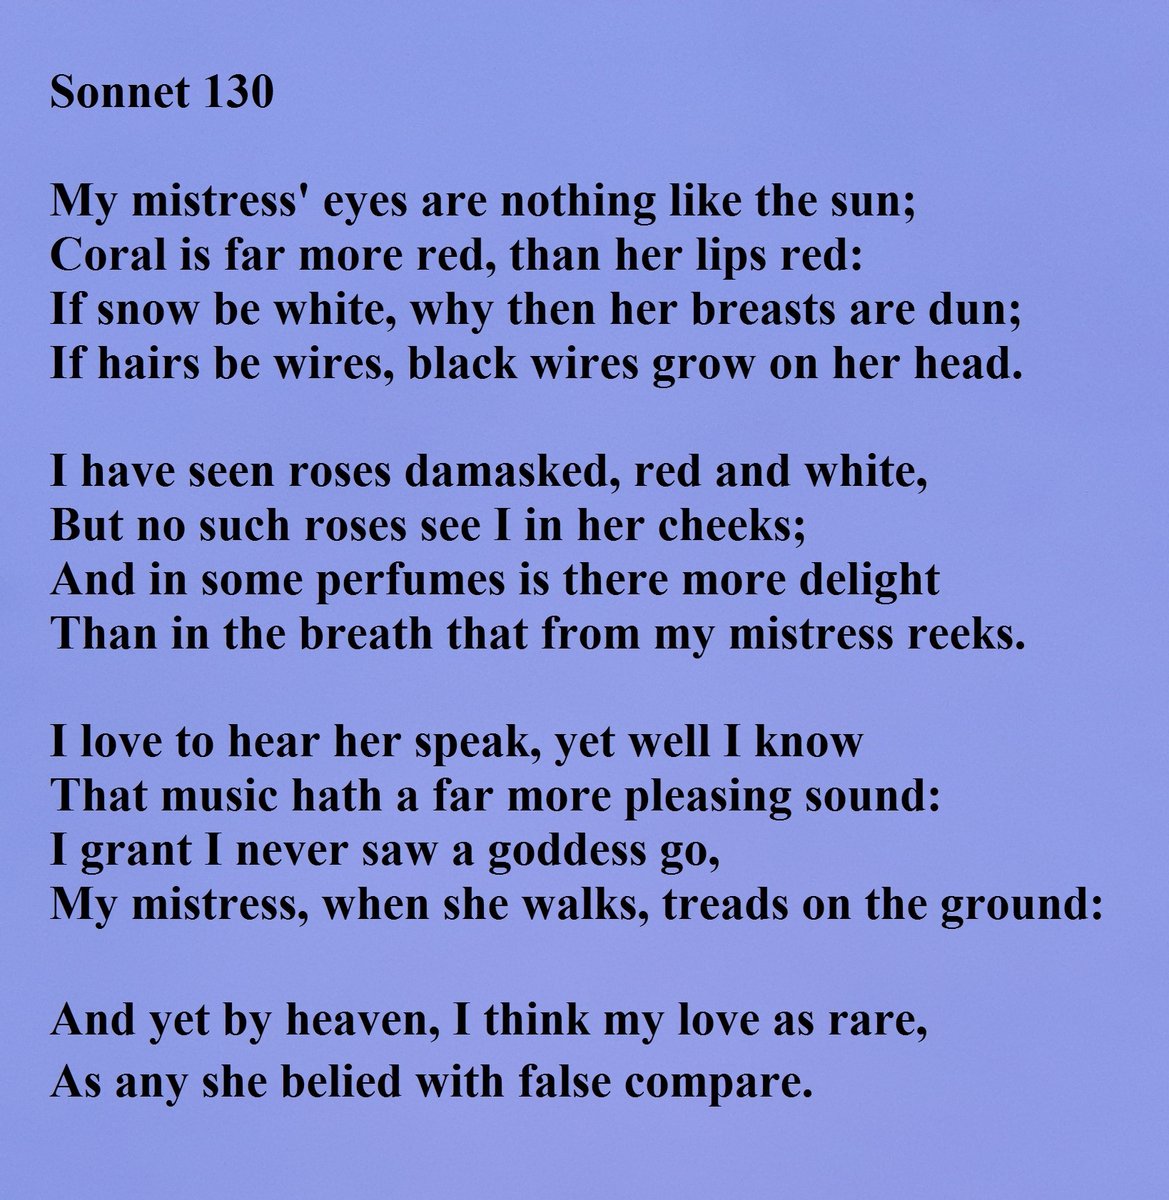 Sonnet 130 by William Shakespeare "My mistress' eyes are nothing like the sun"